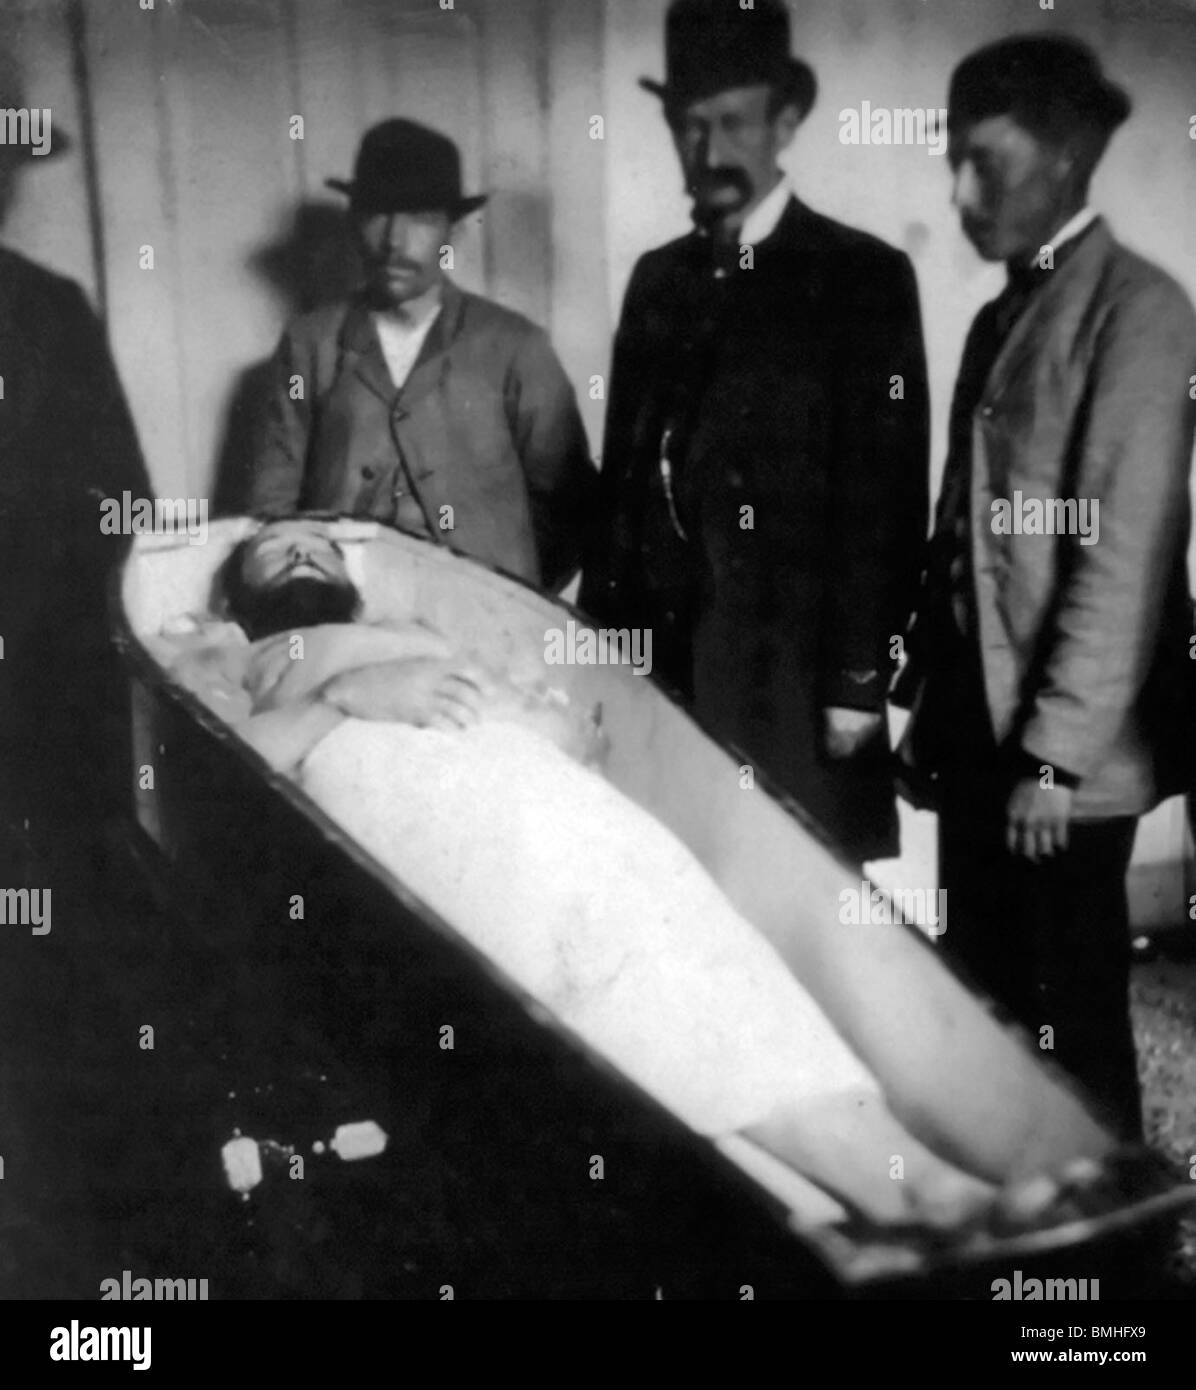 Jesse James, American Outlaw, dead in coffin body half covered with sheet 4 men standing by, 1882 Stock Photo